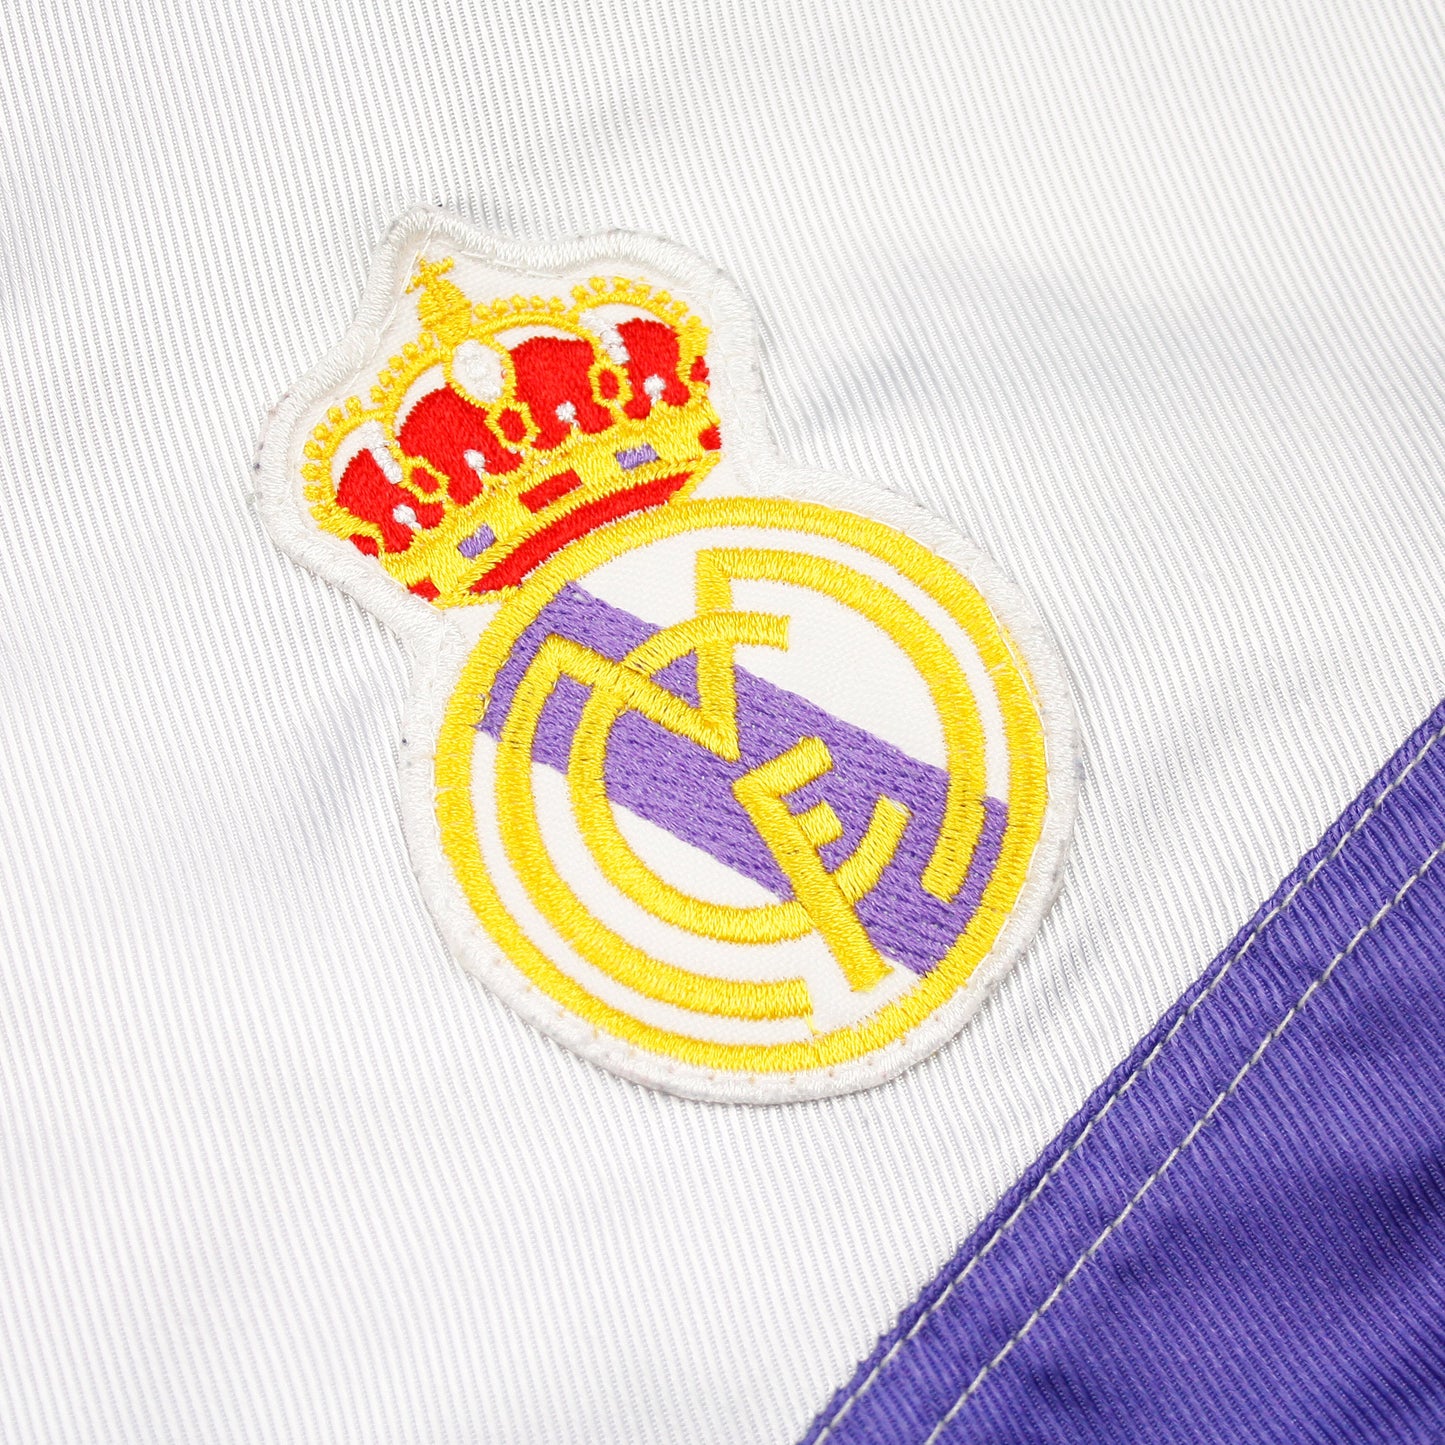 Real Madrid 96/97 • Chándal Completo • L